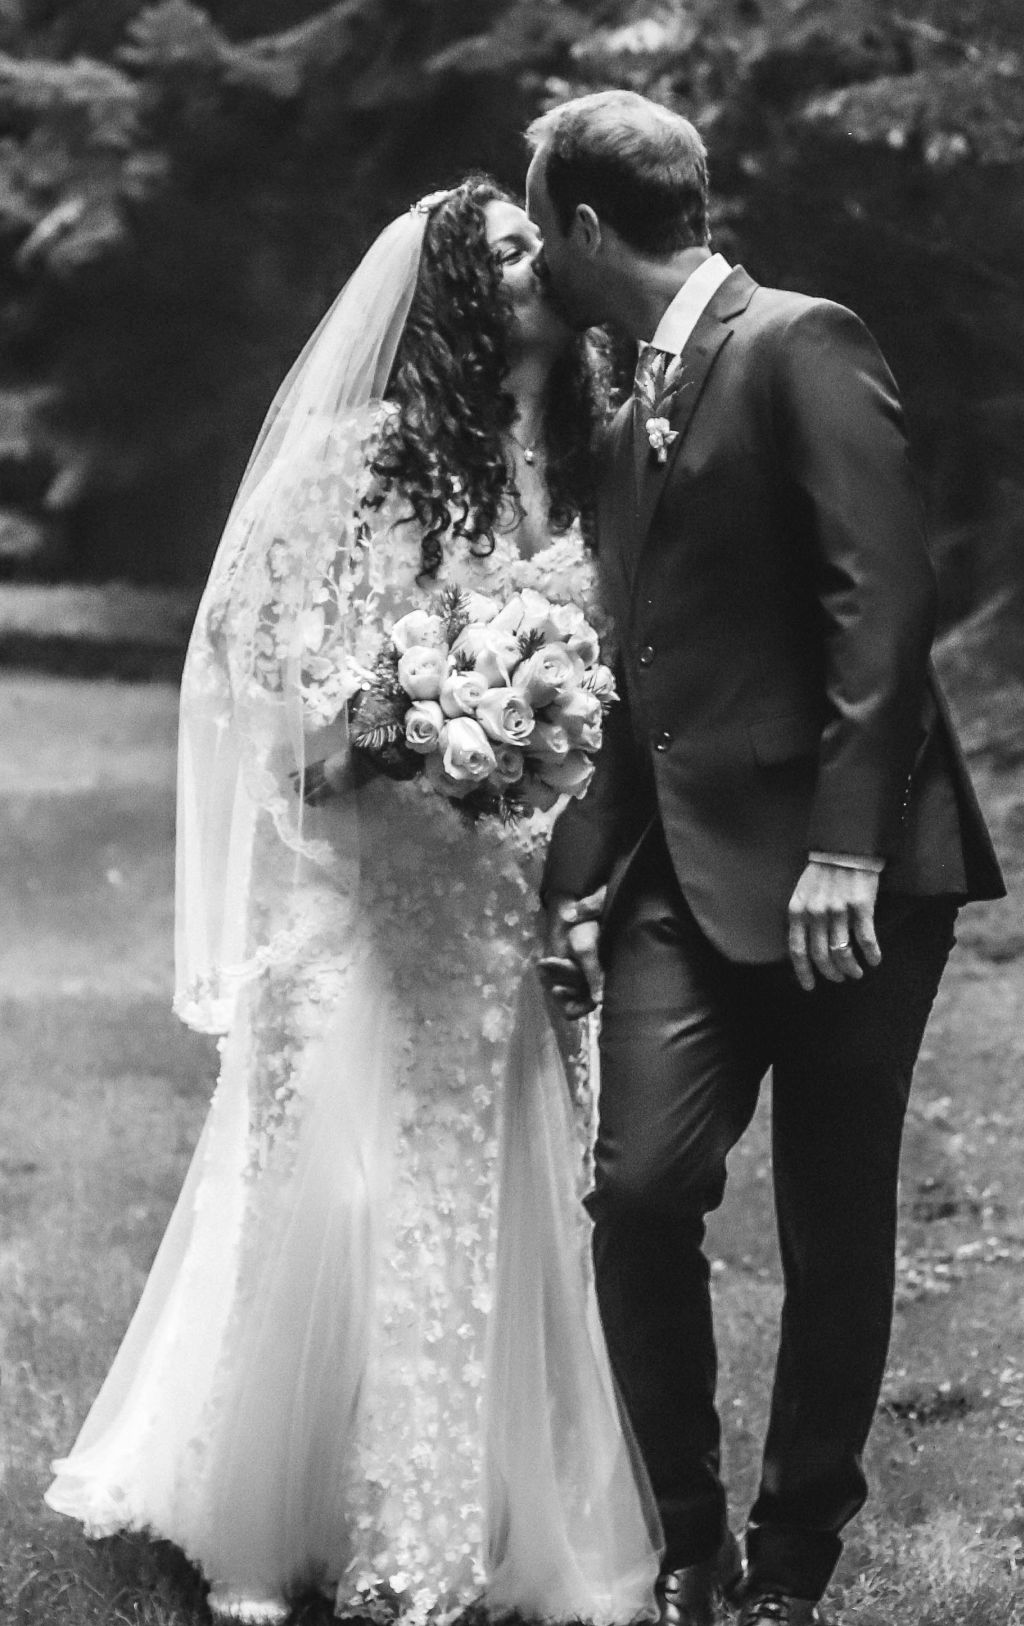 A black and white photo of newly married Christians kissing. The bride is in her wedding dress and holding flowers.